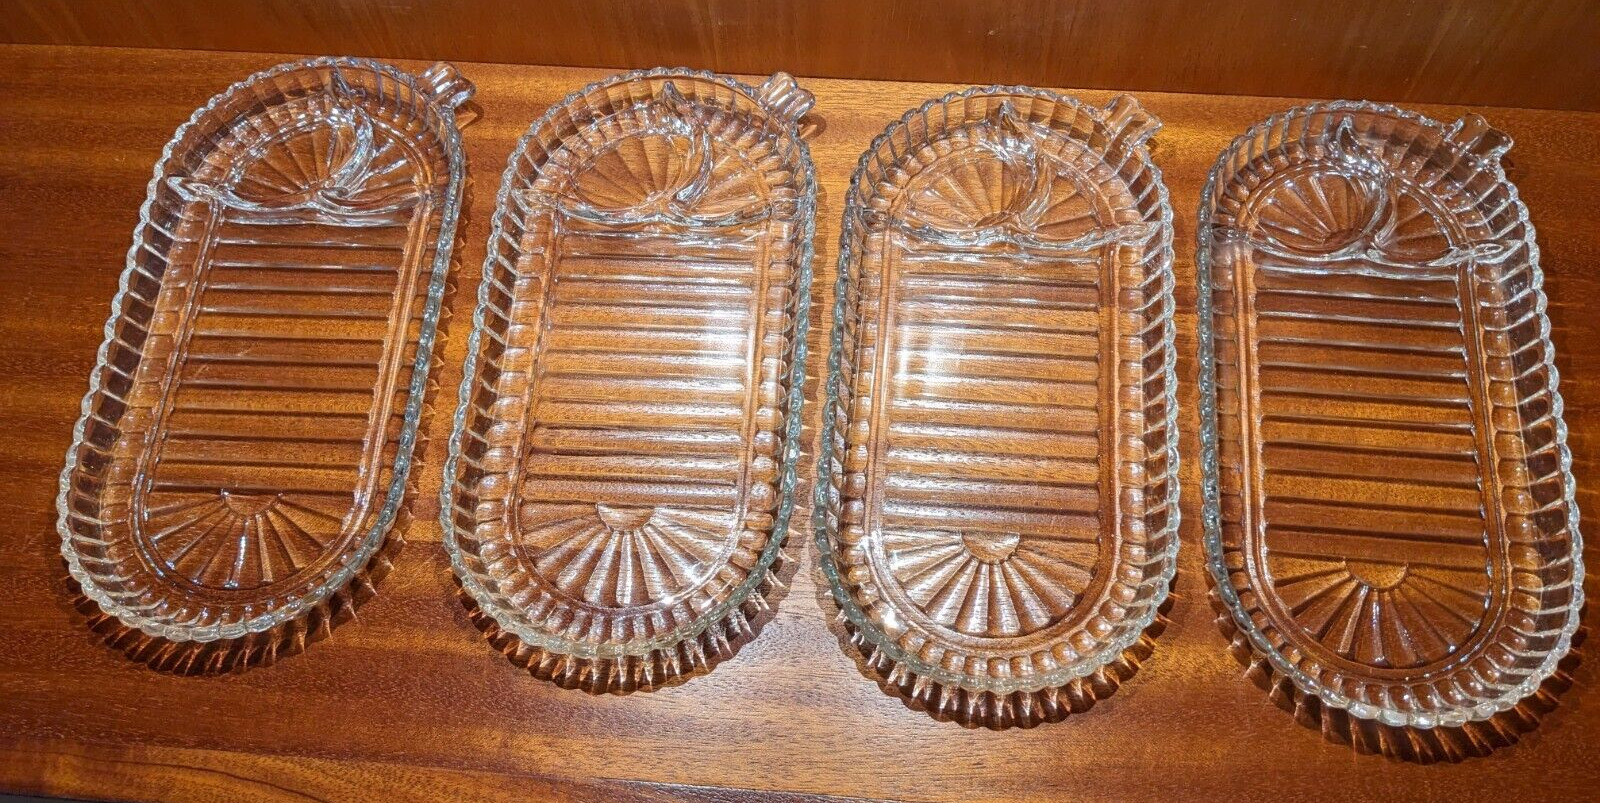 LOT OF 4 VINTAGE PRESSED GLASS DIVIDED LUNCHEON SNACK PLATES ART DECO?